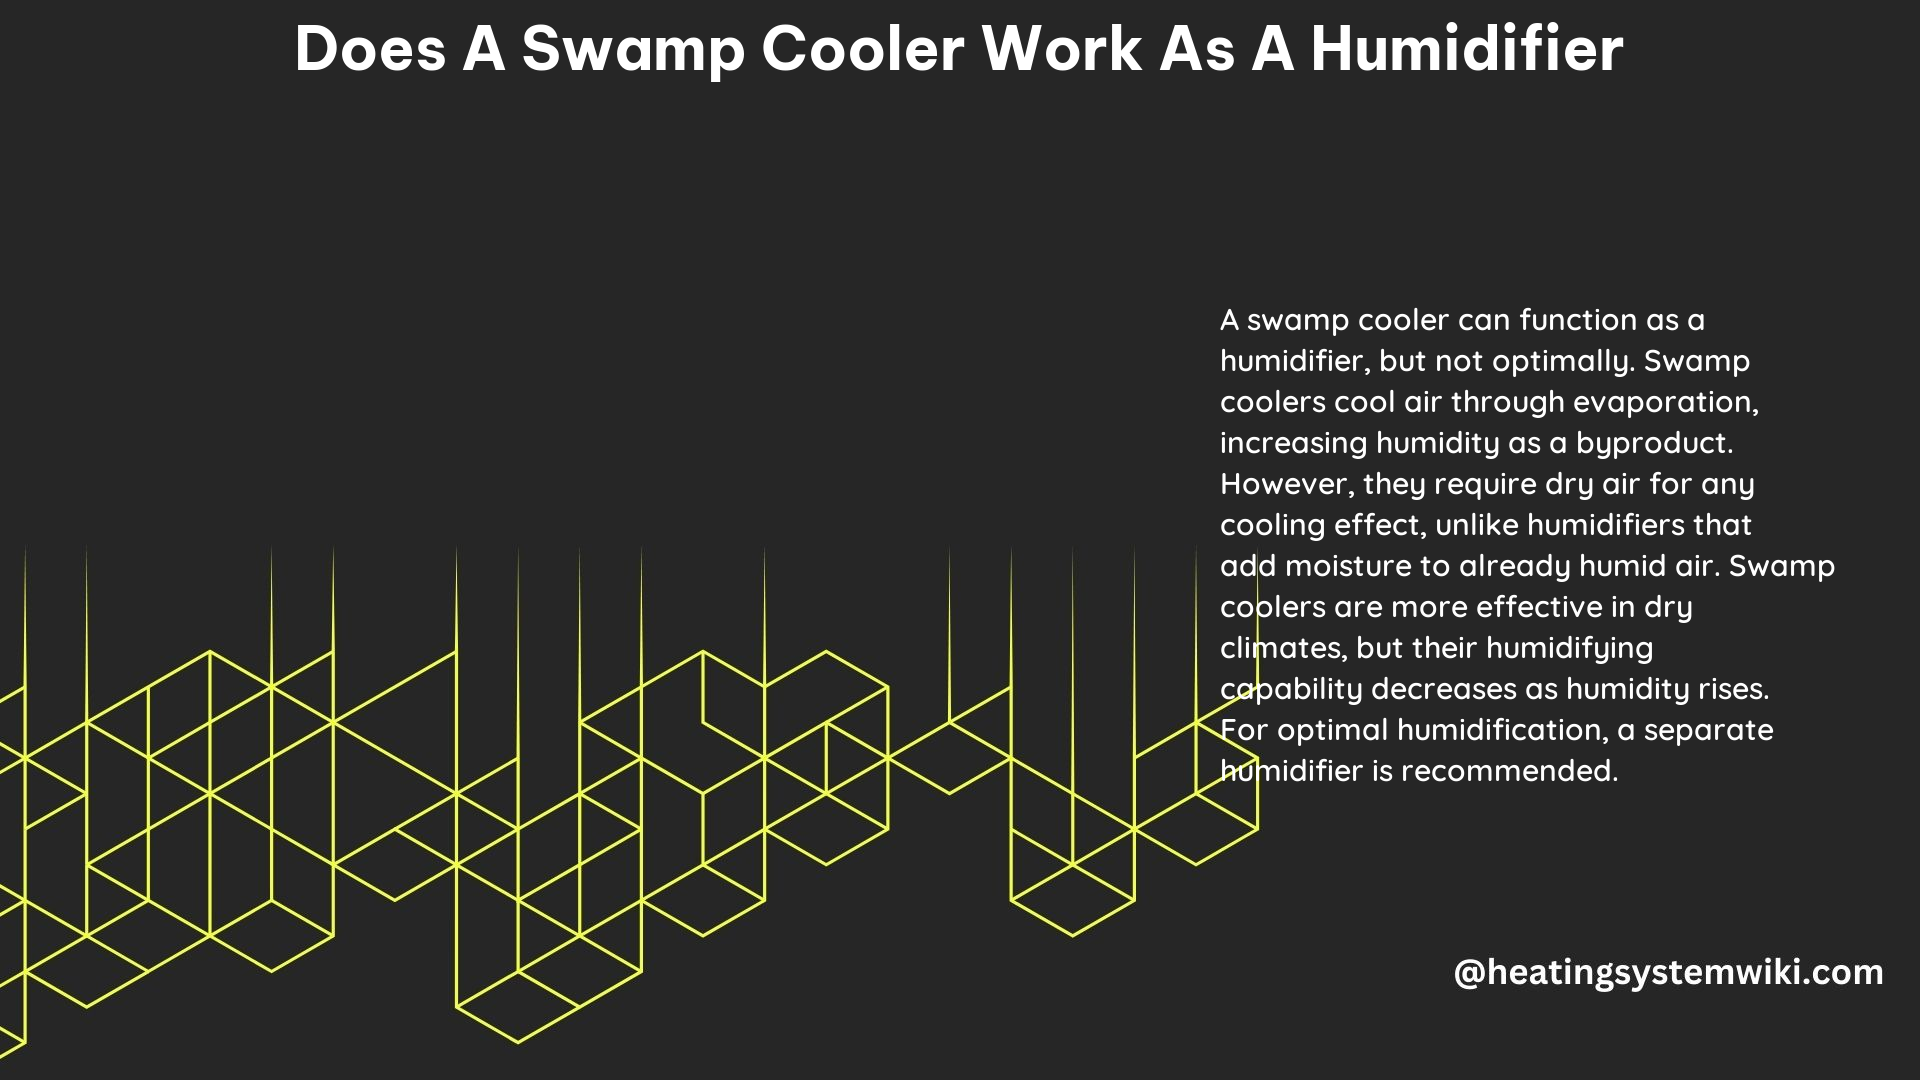 Does a Swamp Cooler Work as a Humidifier